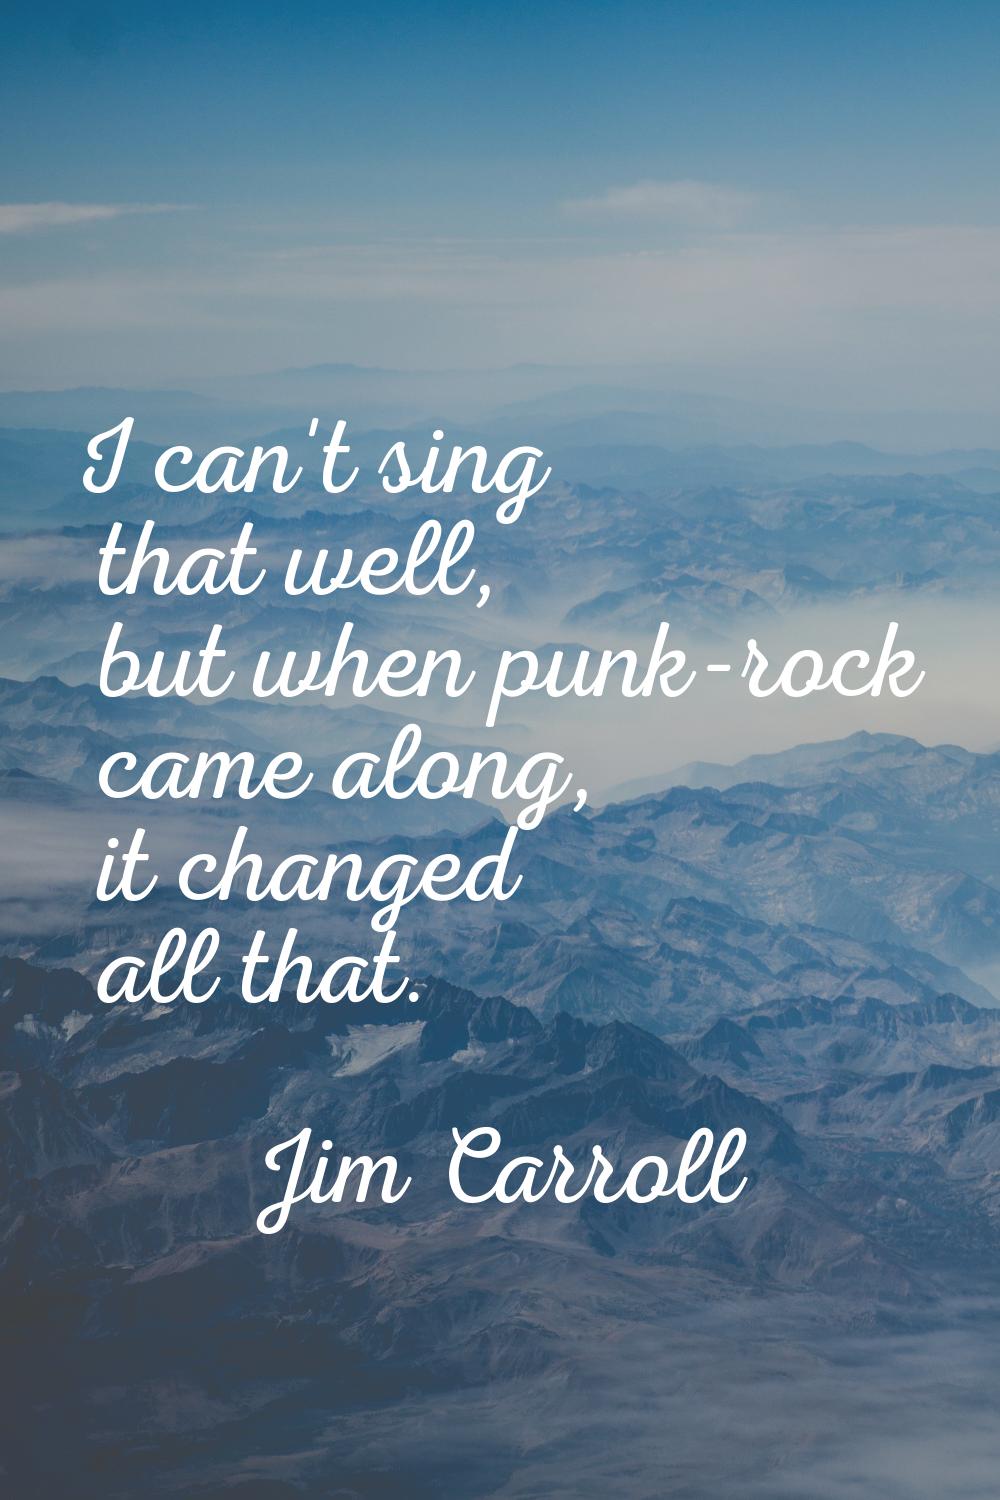 I can't sing that well, but when punk-rock came along, it changed all that.